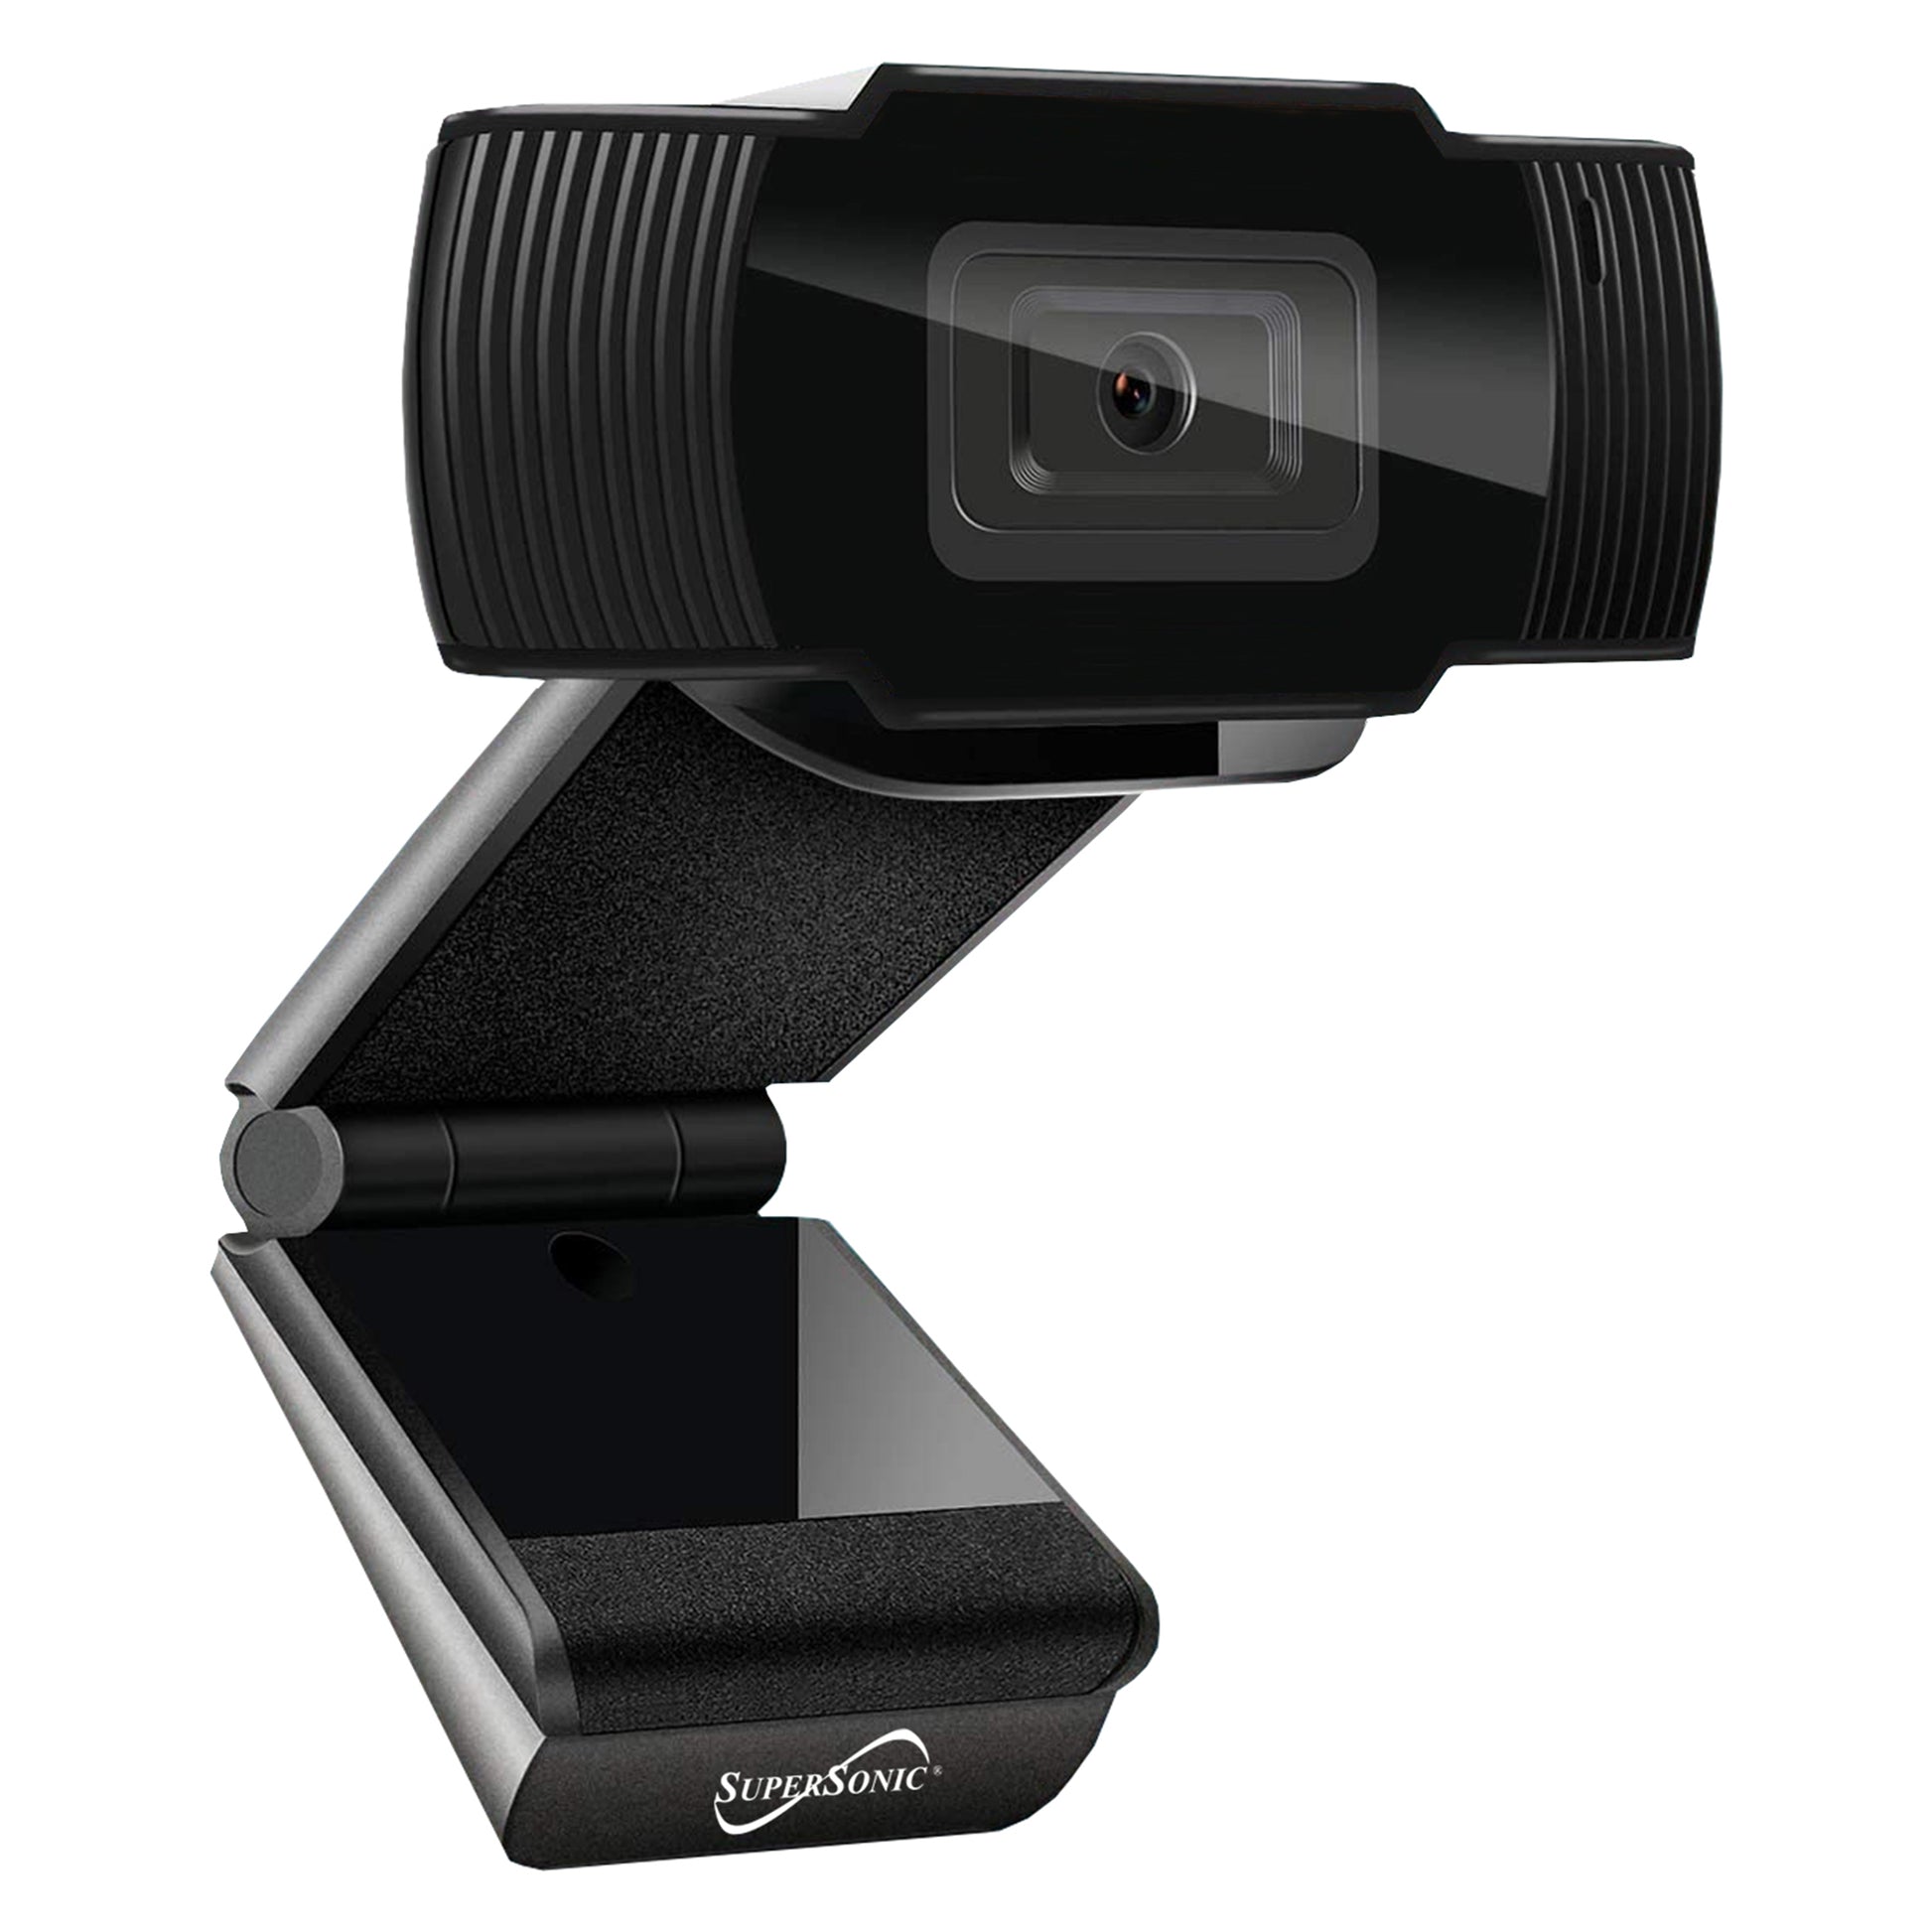 Pro-hd Webcam For Video Streaming And Recording – Supersonic Inc